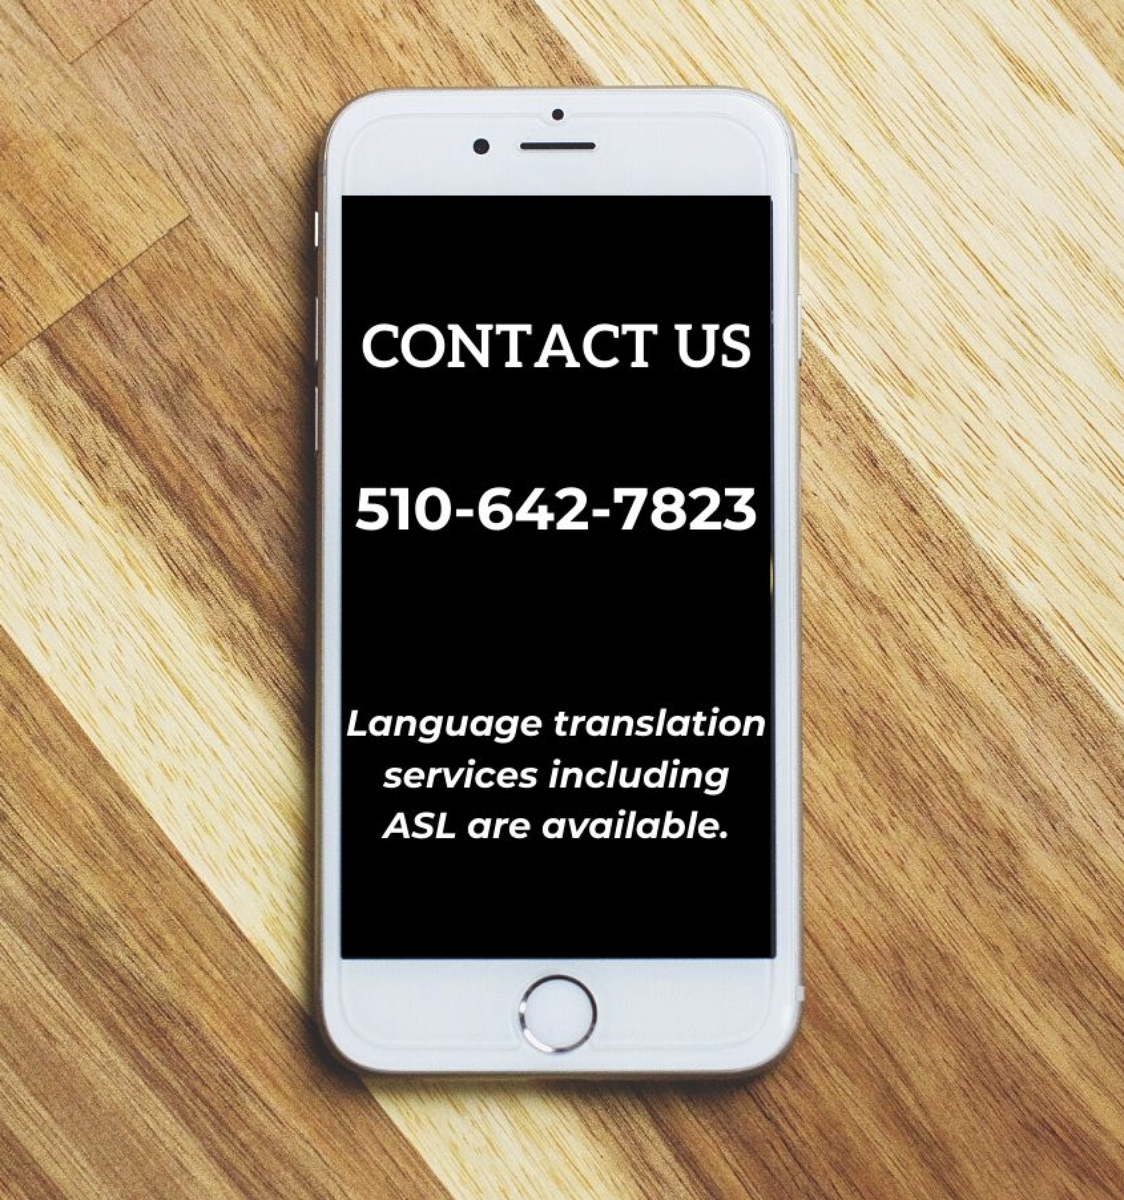 Contact Us- 510-642-7823. Language translation services including ASL are available.